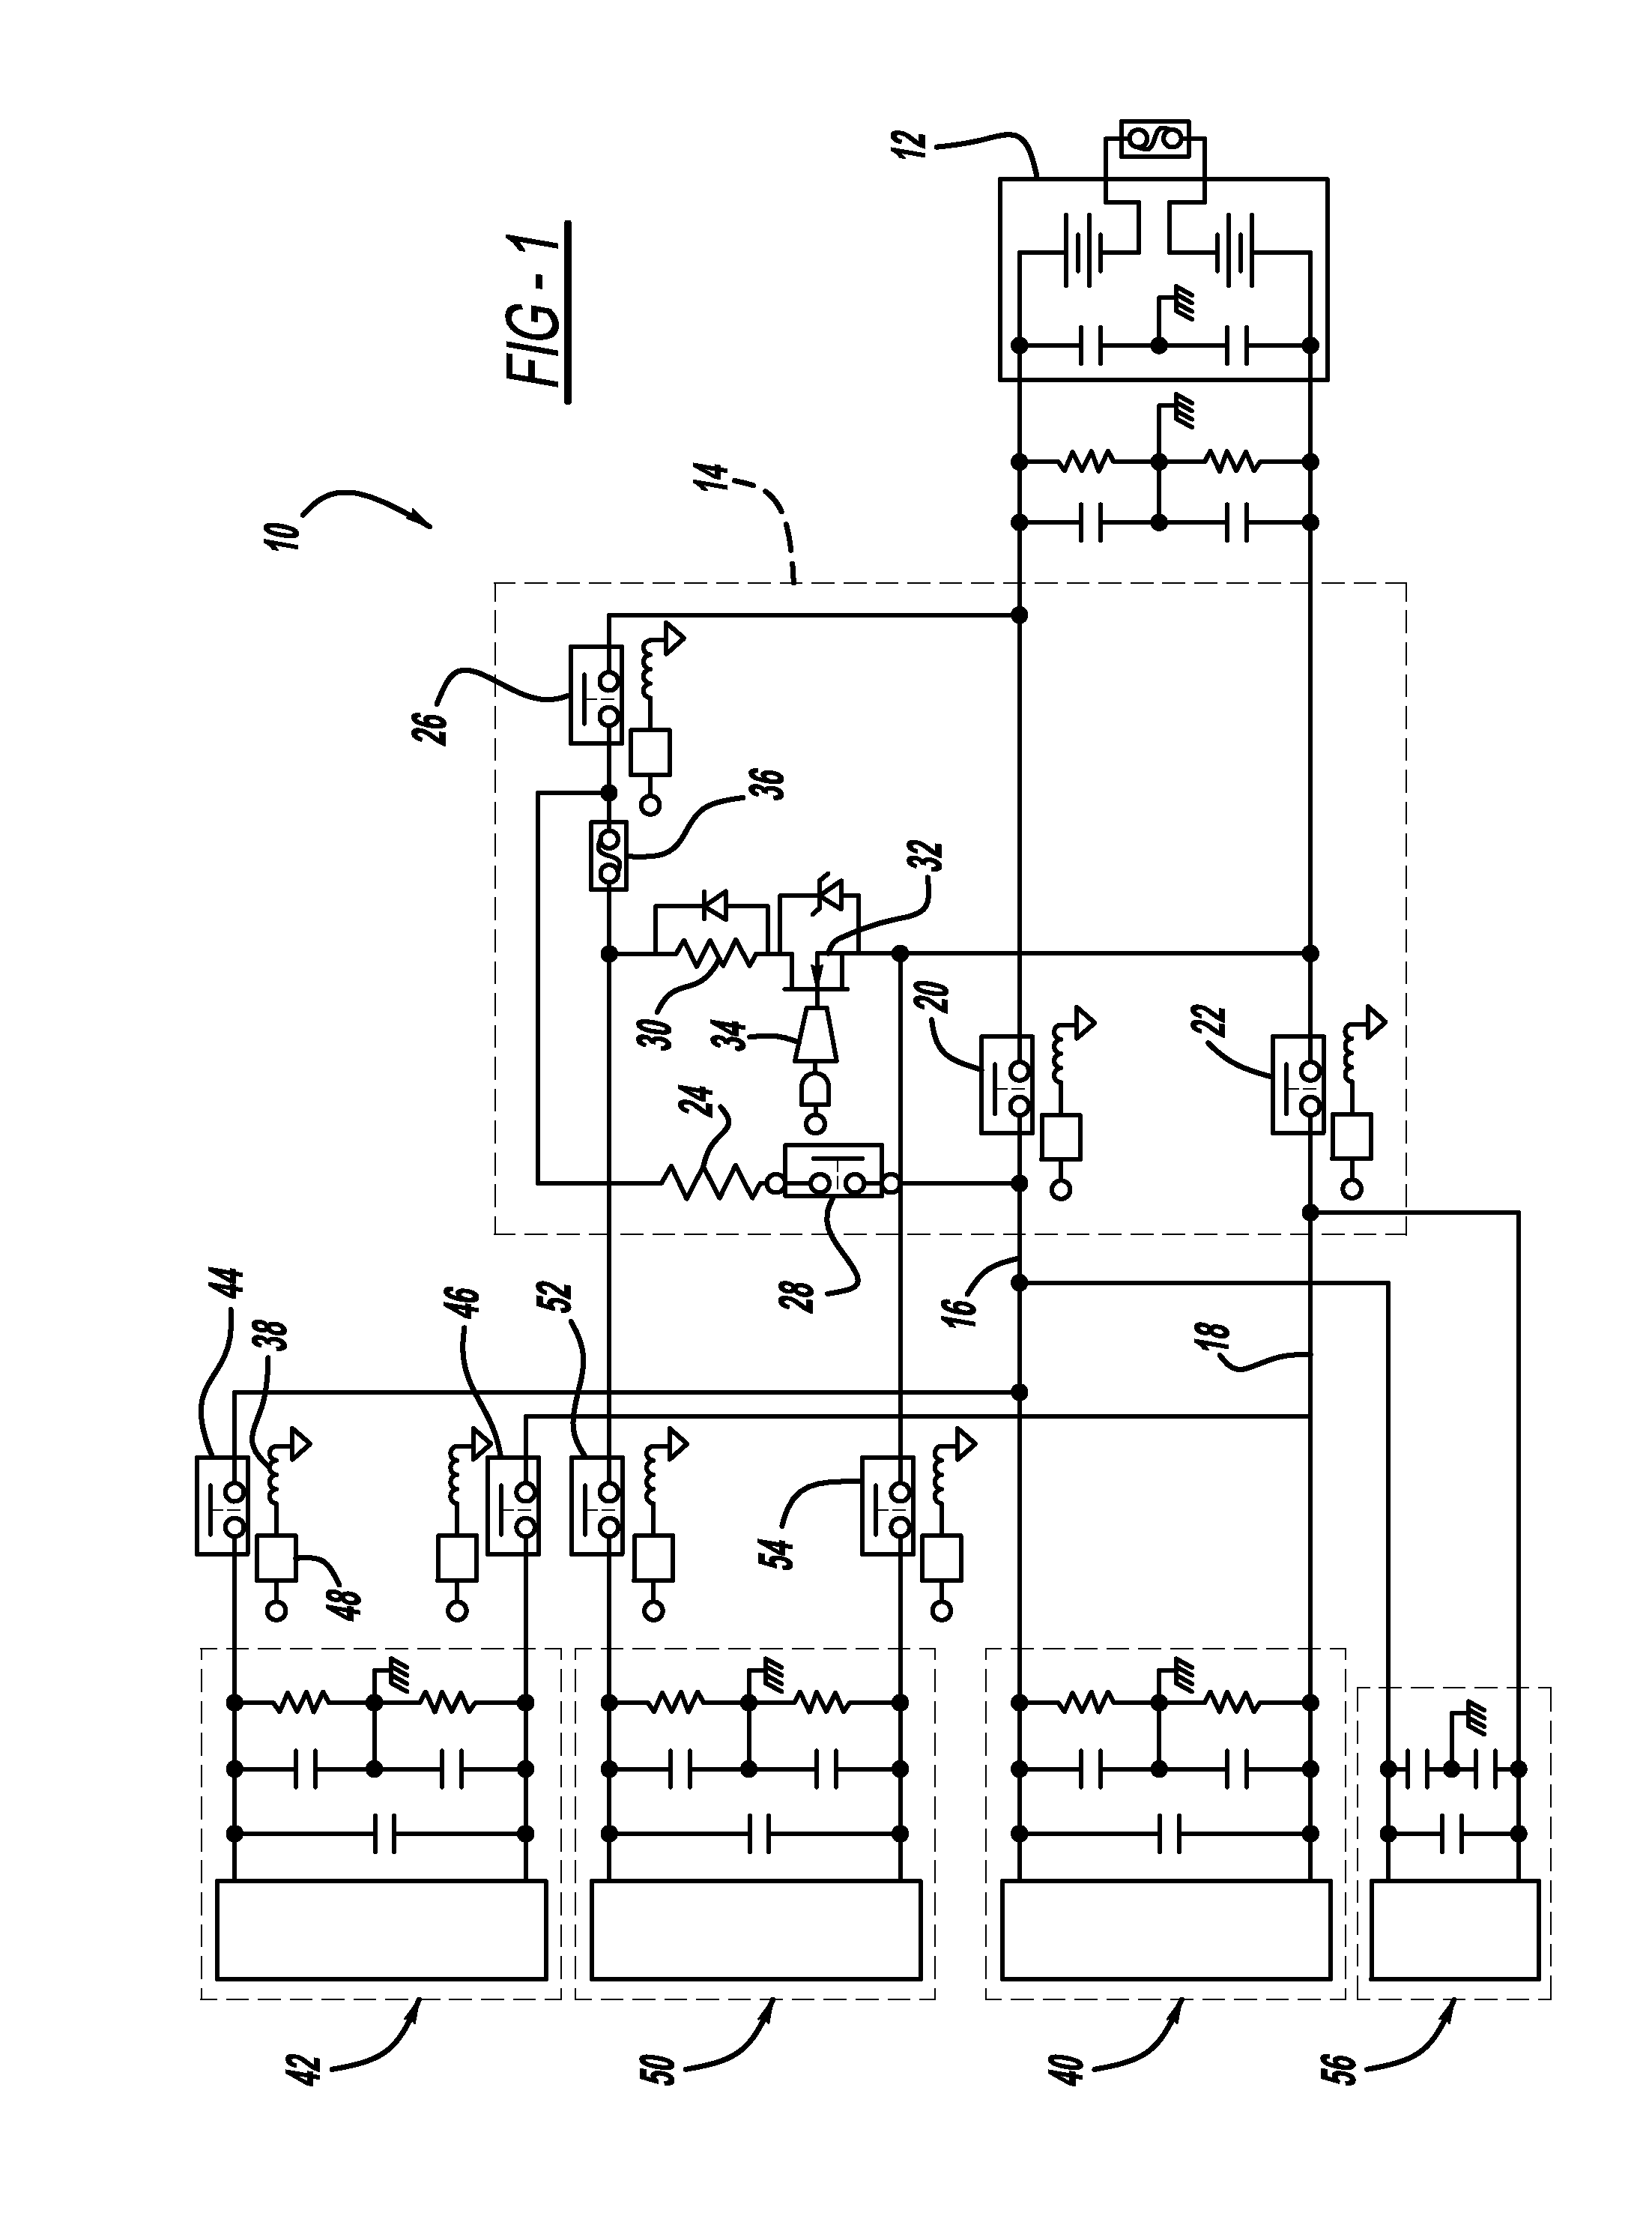 Diagnosis of hev/ev battery disconnect system